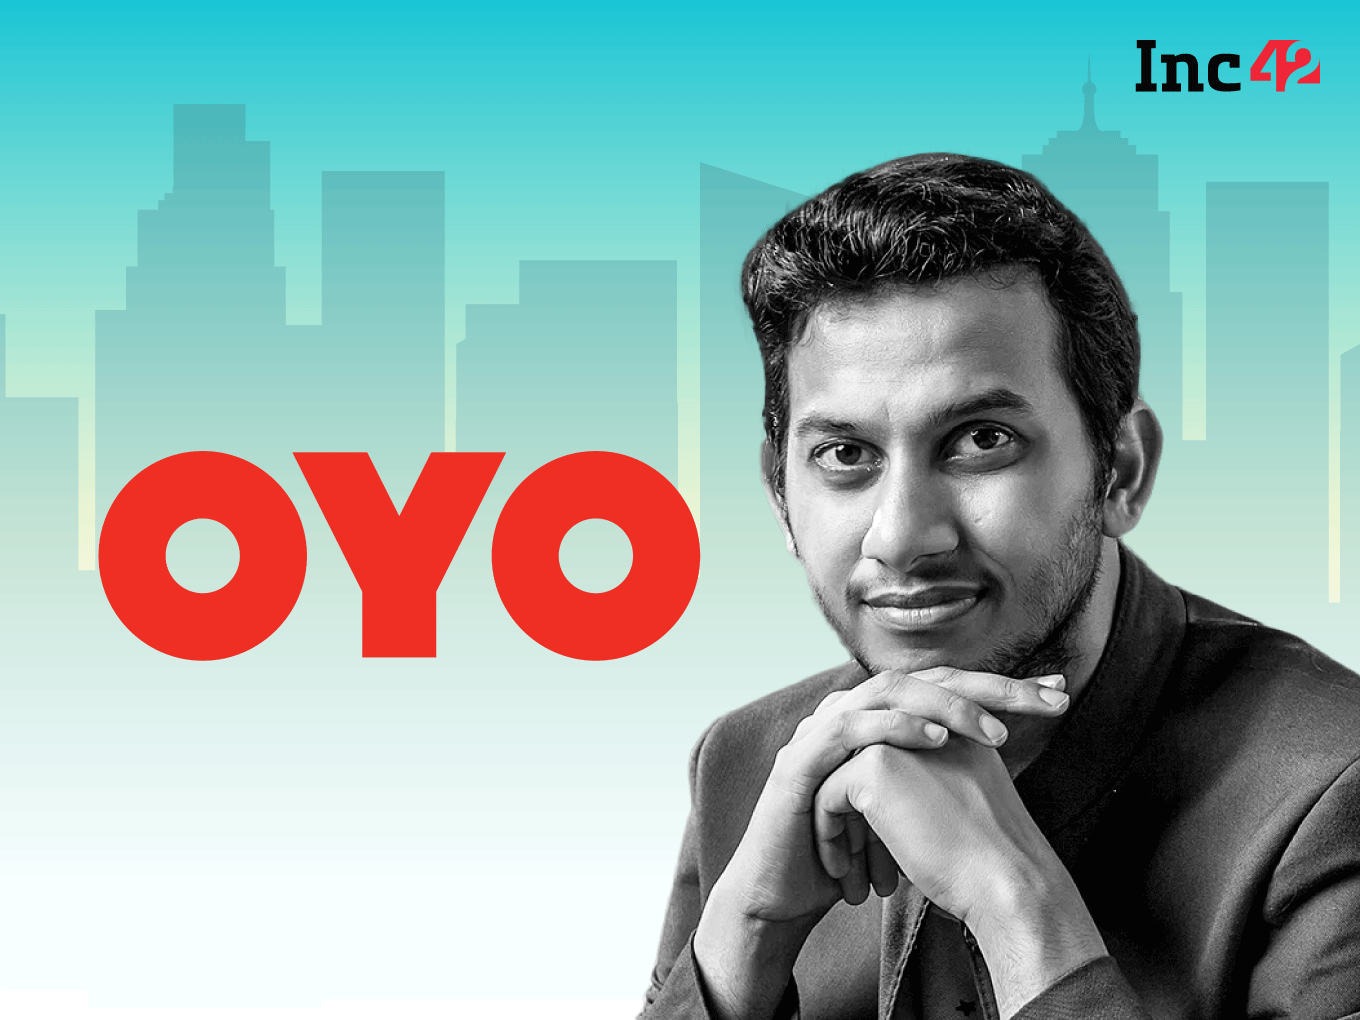 IPO-Bound OYO Seeks $400 Mn Funding From Malaysia's Sovereign Fund Khazanah At $6 Bn Valuation